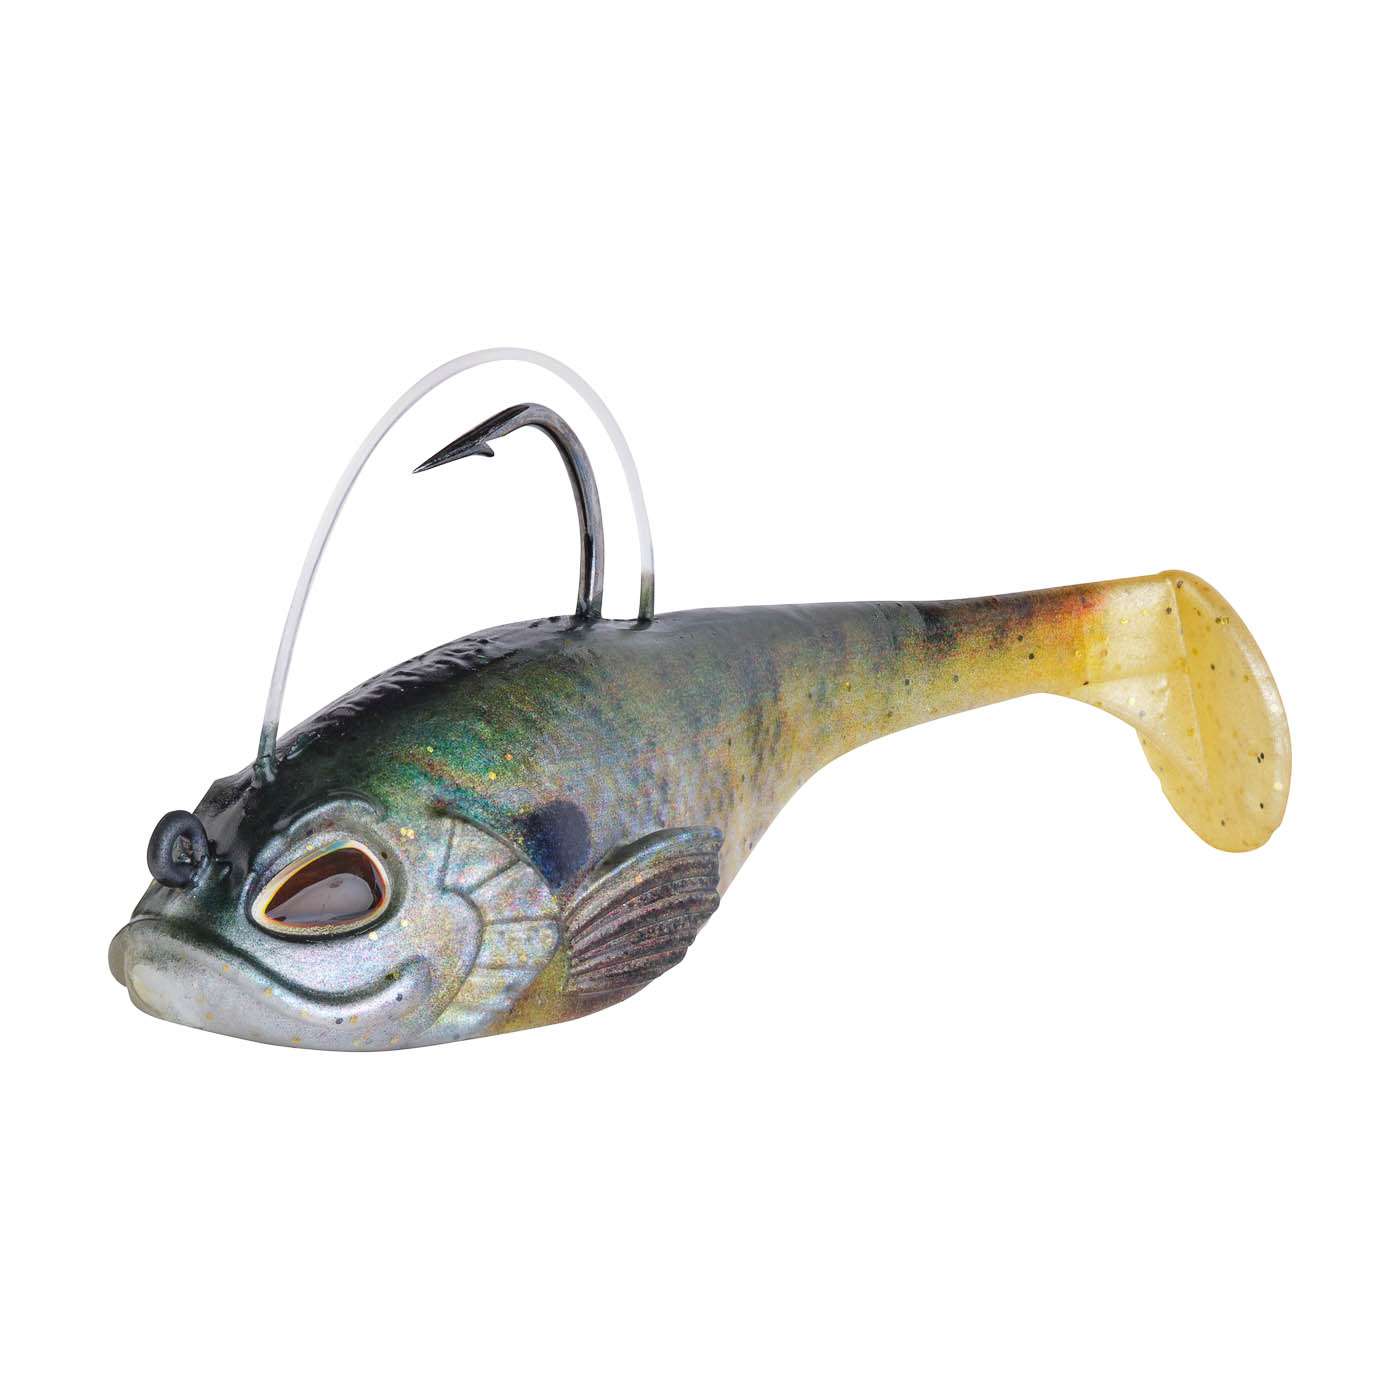 <p><strong>PowerBait Agent E</strong></p><p>The PowerBait-infused Agent E is a bottom-dwelling, flat-bottom swimbait with an ultra-low center of gravity and internal weighting that allows it to skid across the bottom. A built-in hard-nose subtle rattle draws even more attention. The integrated fluorocarbon hook keeper is invisible to fish, and sheds debris while remaining easily collapsible on the strike. Sizes: 2.25 inches (3/8 ounce); 3 inches (1/2 ounce); 3 inches (3/4 ounce) and 3.75 inches (1 ounce). Available in six high-definition HD Tru Colors and three Standard colors. Available October 2021. $7.99-$8.99 for HD Tru Colors and $6.99-$7.99 for Standard colors. <a href=